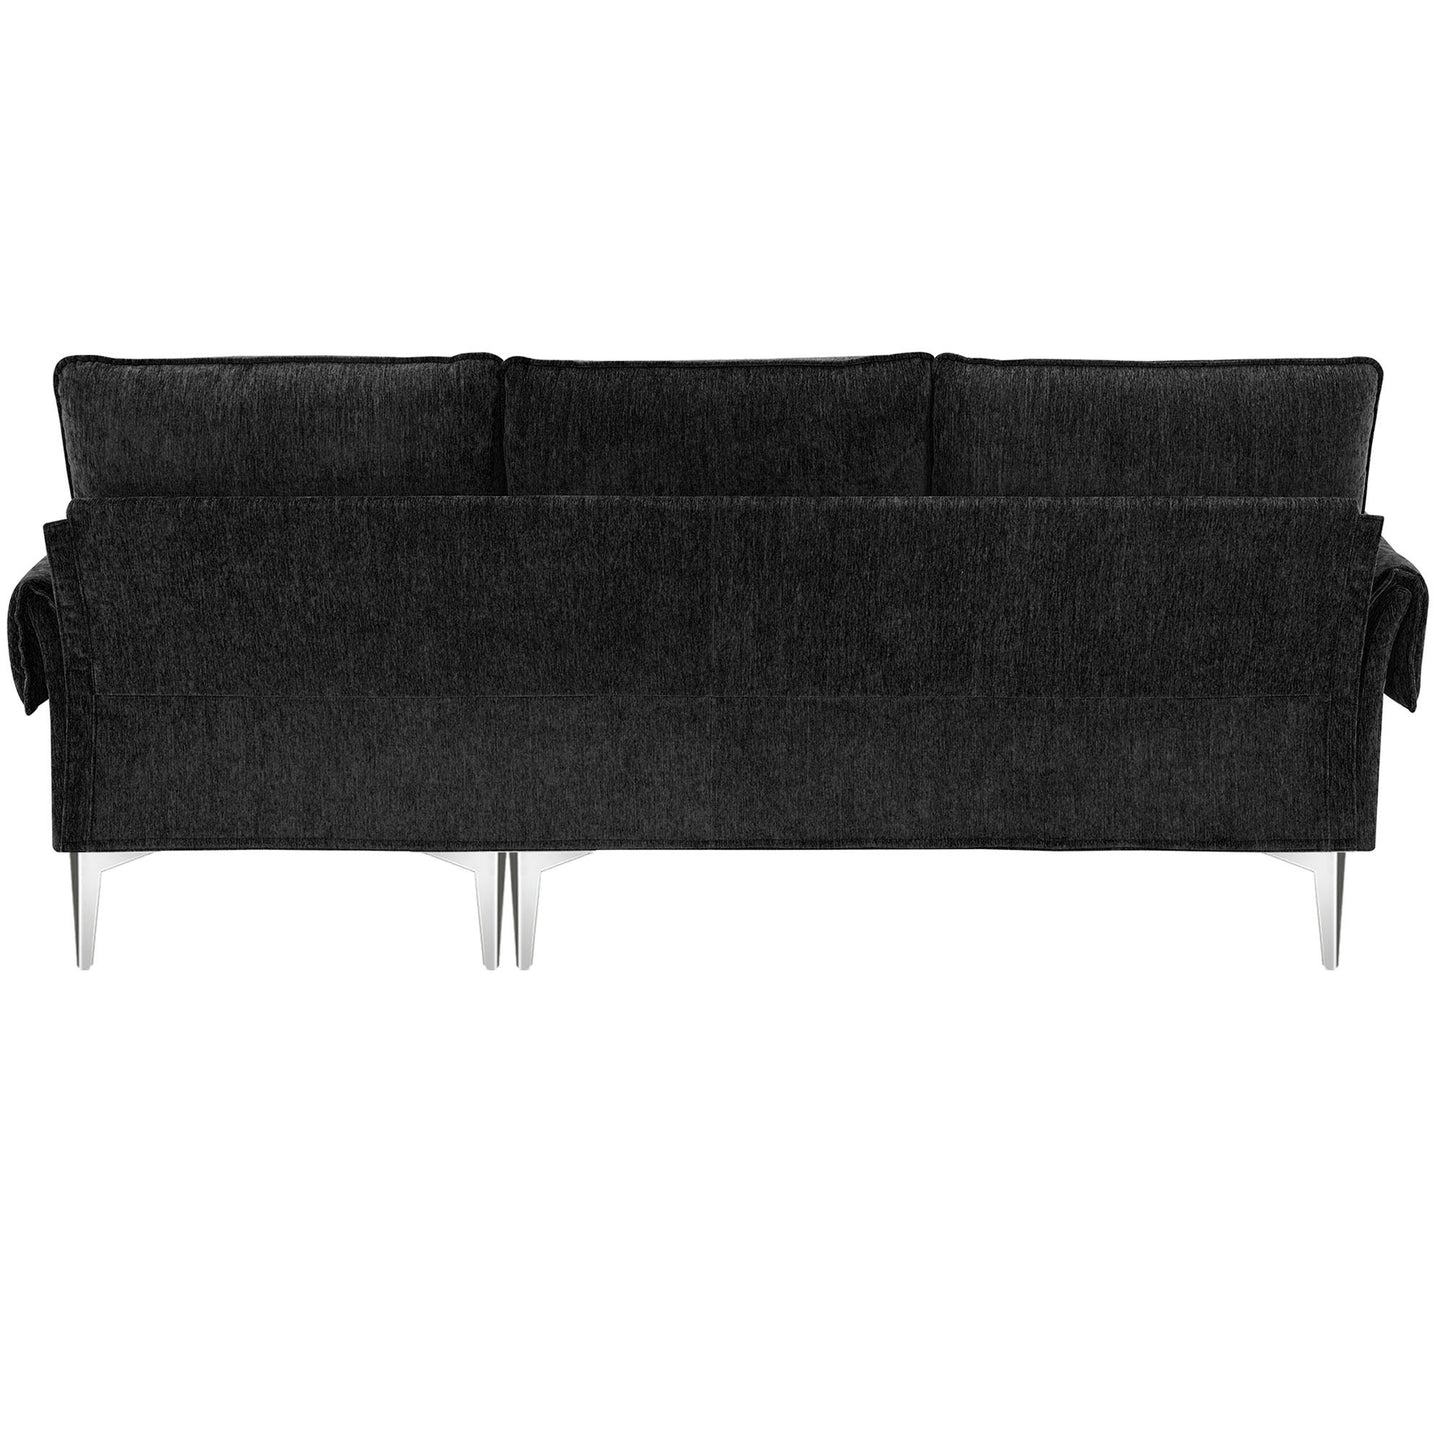 84" Convertible Sectional Sofa, Modern Chenille L-Shaped Sofa Couch with Reversible Chaise Lounge, Fit for Living Room, Apartment (2 Pillows)